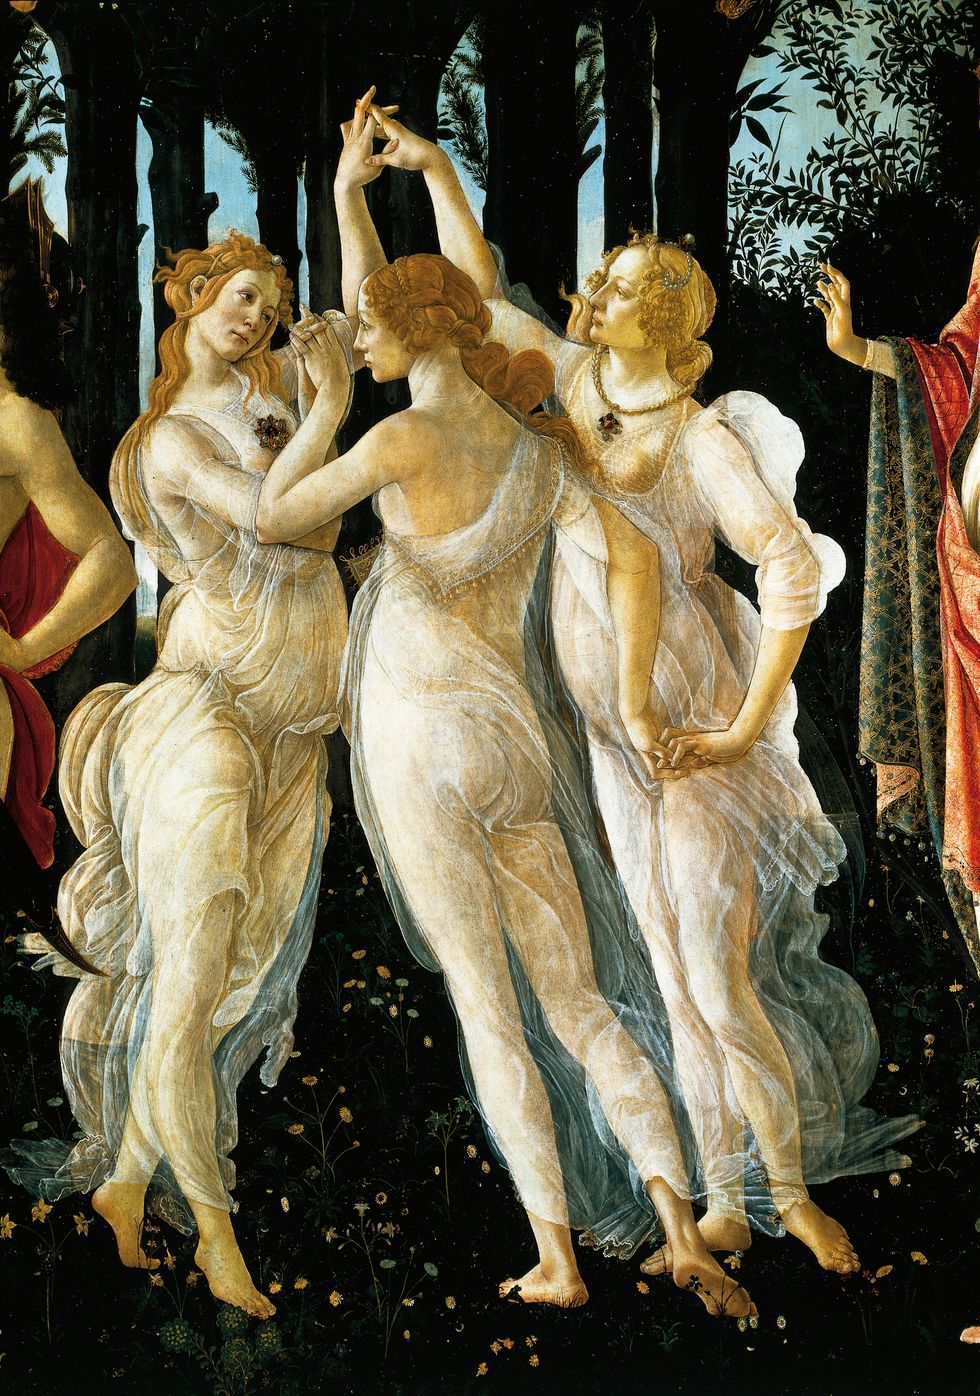 'The Three Graces' by Sandro Botticelli